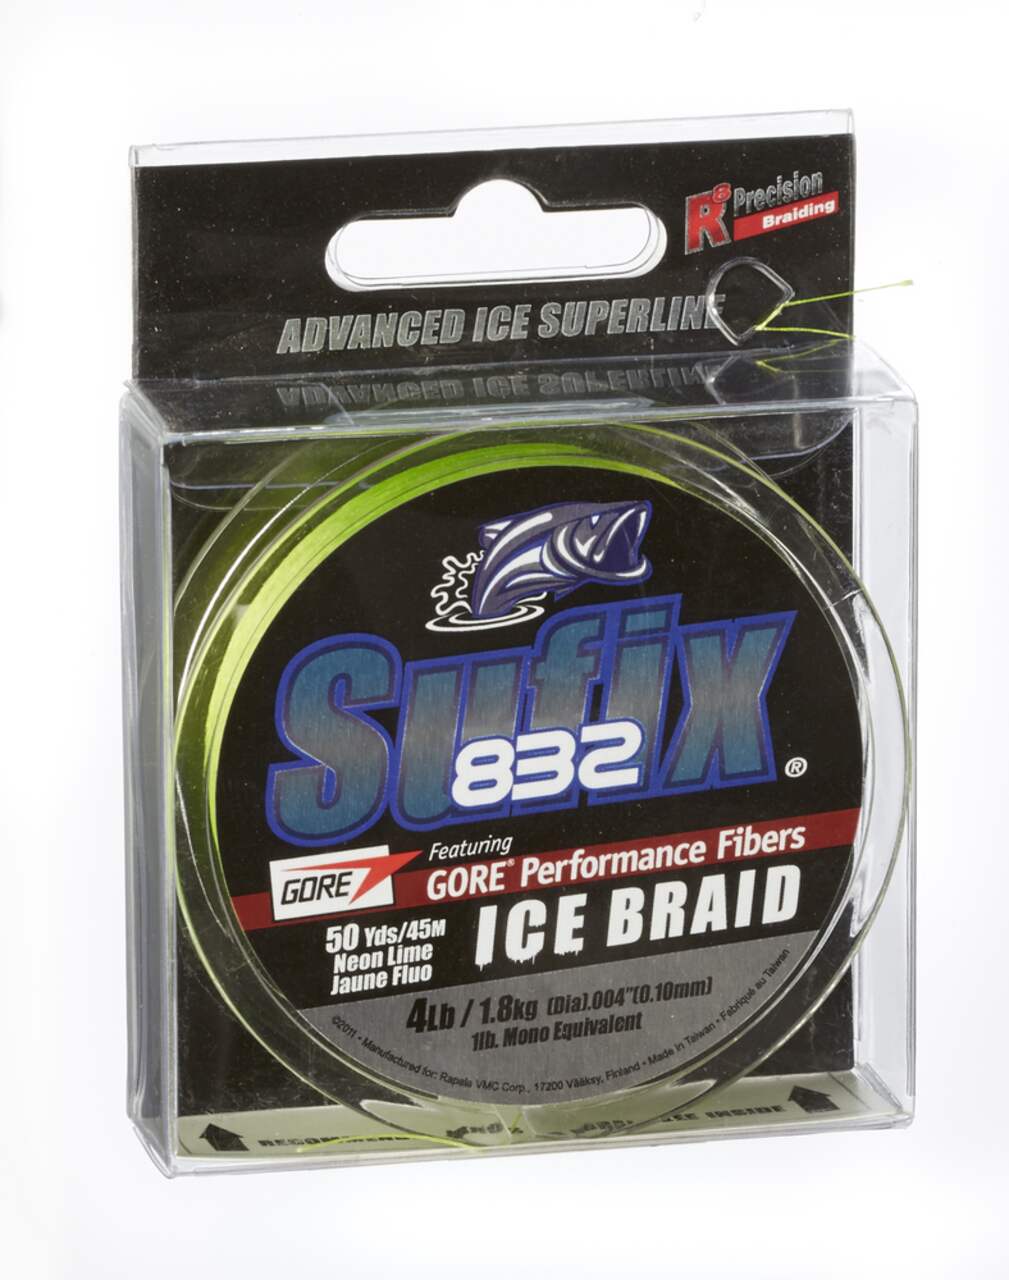 Sufix Performance Ice Fuse Fishing Line, Fluorescent Neon Fire, 8-Pound